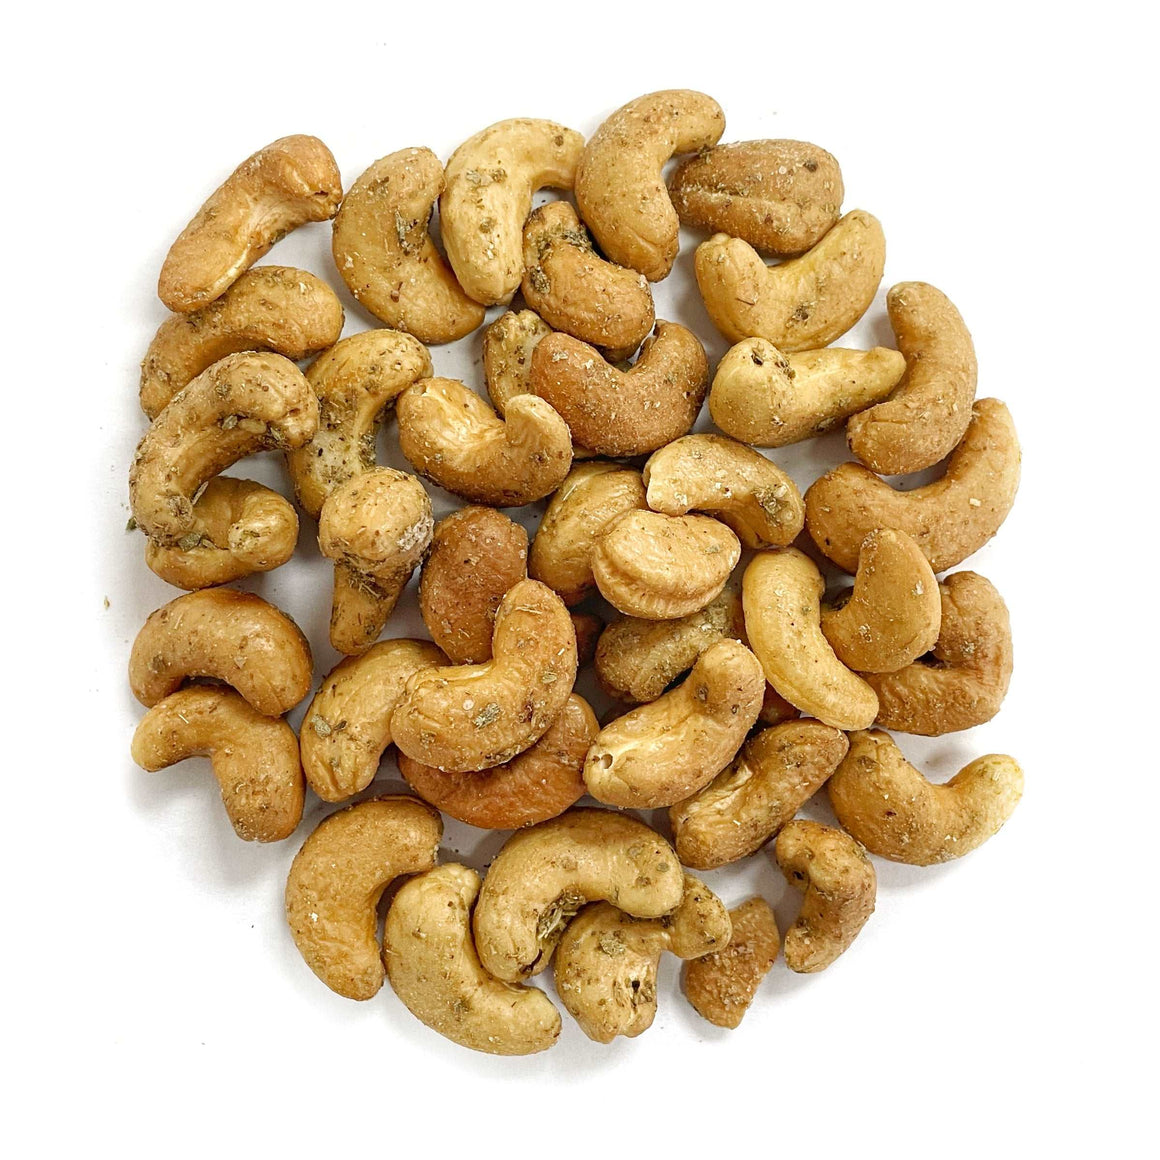 A pile of Zaatar Roasted Cashews on a white background.